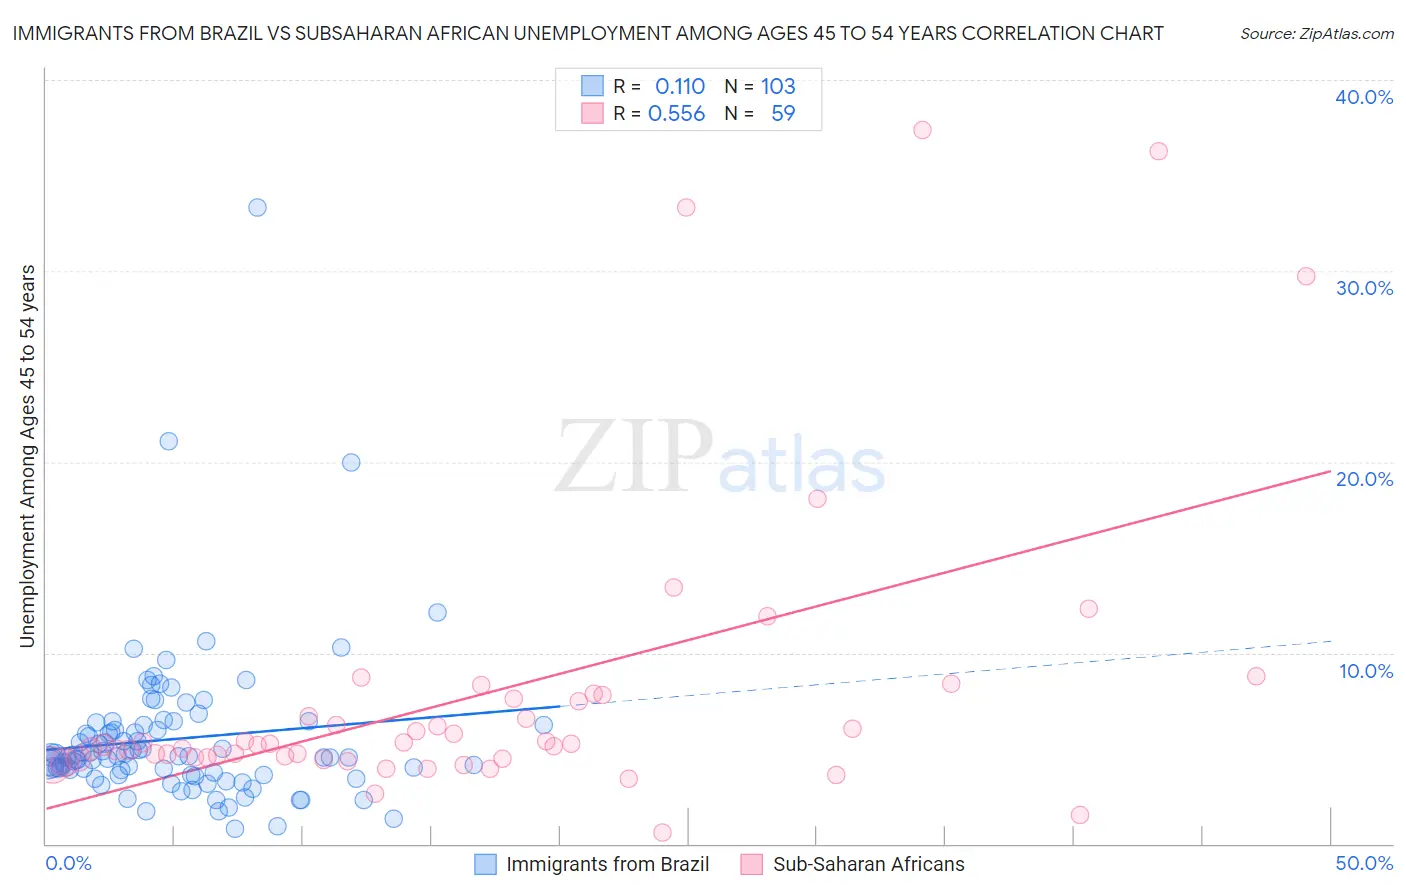 Immigrants from Brazil vs Subsaharan African Unemployment Among Ages 45 to 54 years